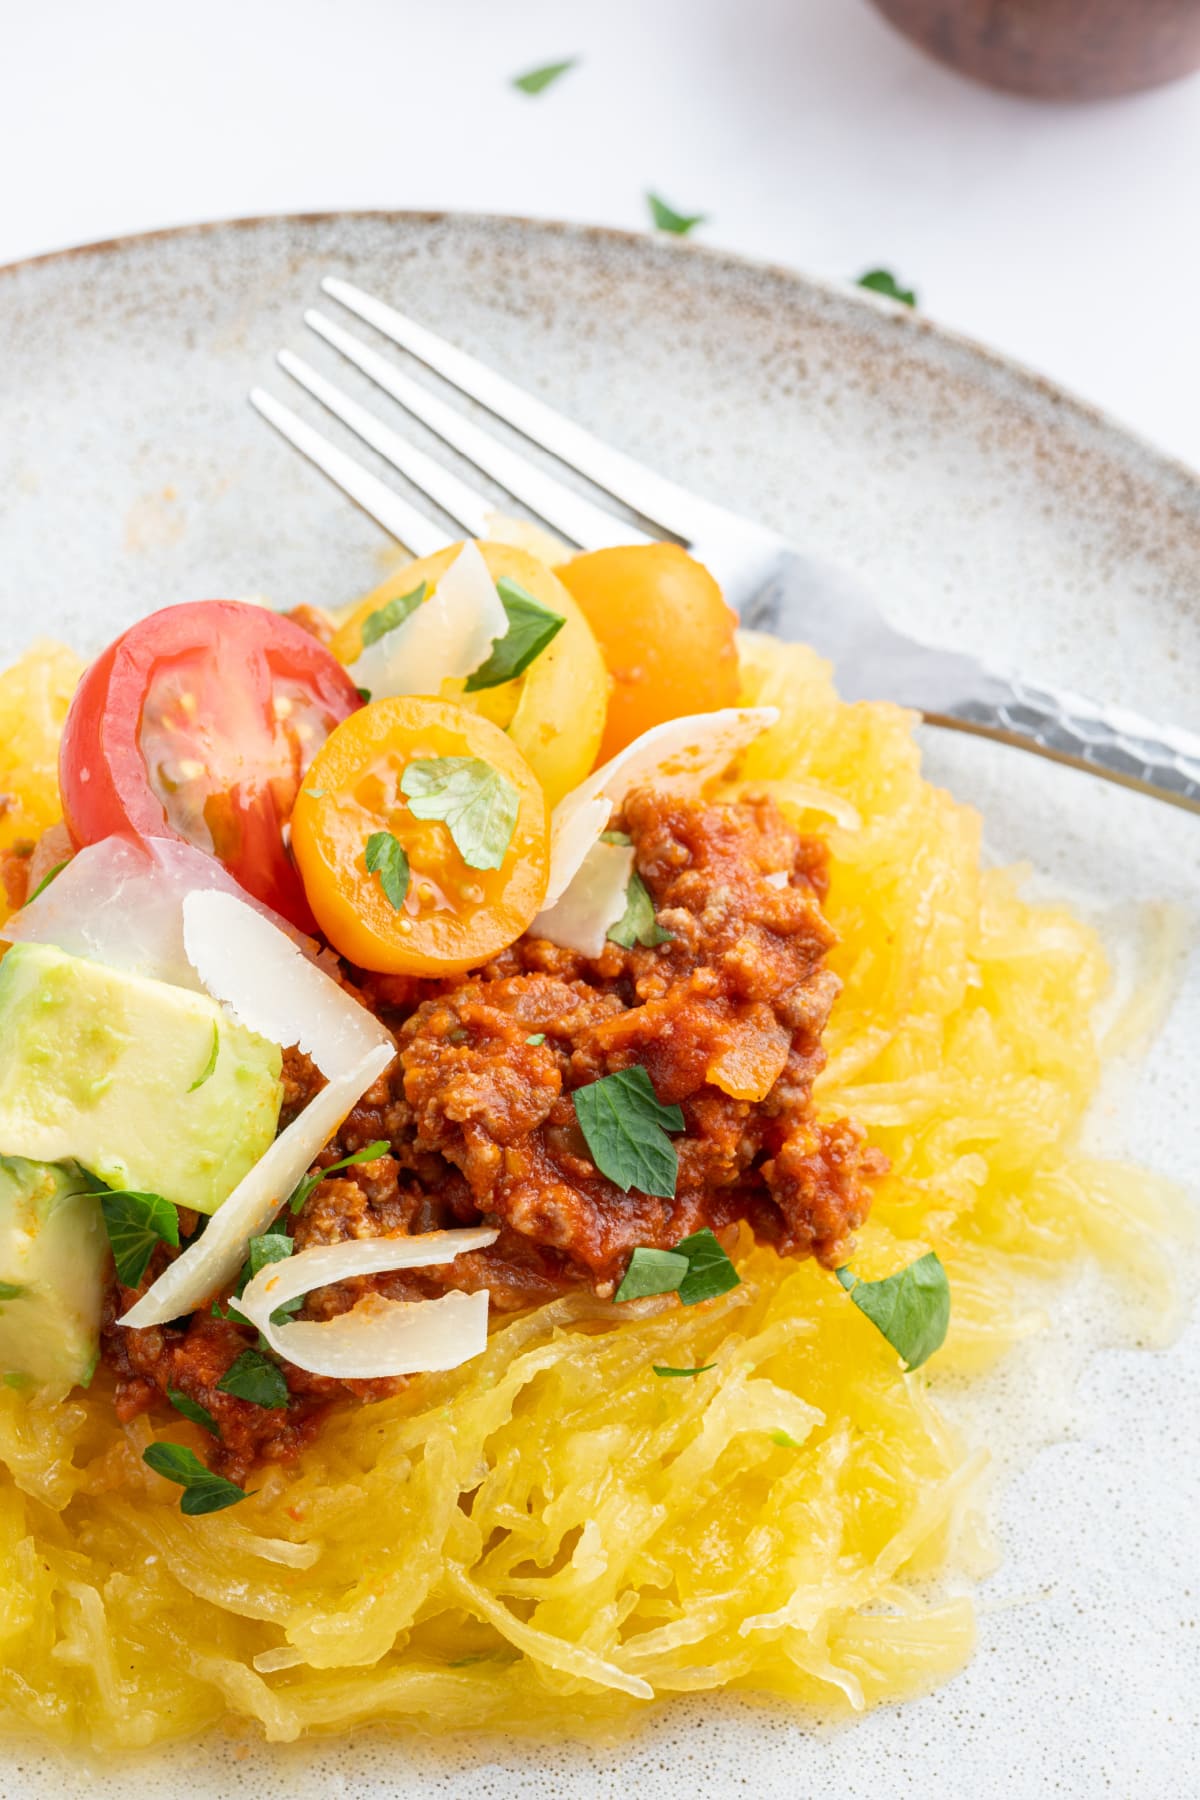 serving of spaghetti squash on plate topped with spicy meat sauce and garnishes